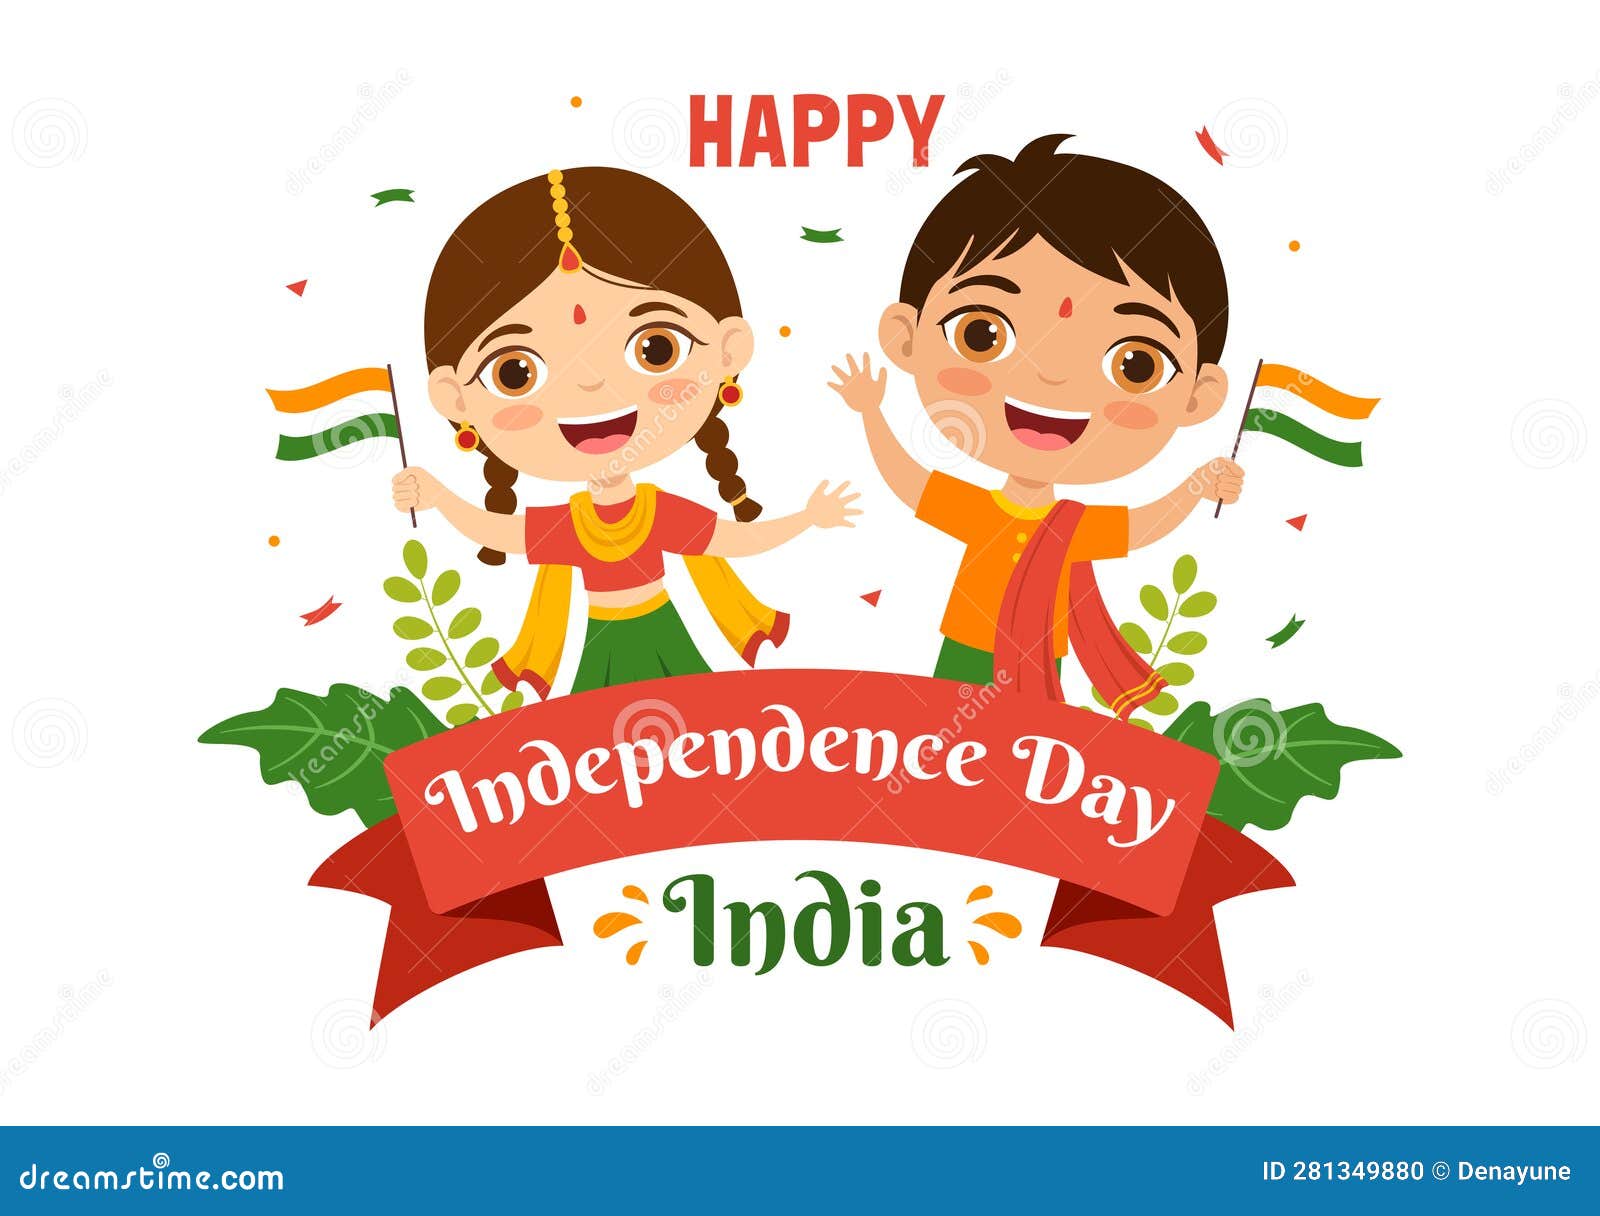 Independence day drawing | 15 august drawing | Indian flag drawing for independence  day | Independence day drawing, Flag drawing, Happy independence day